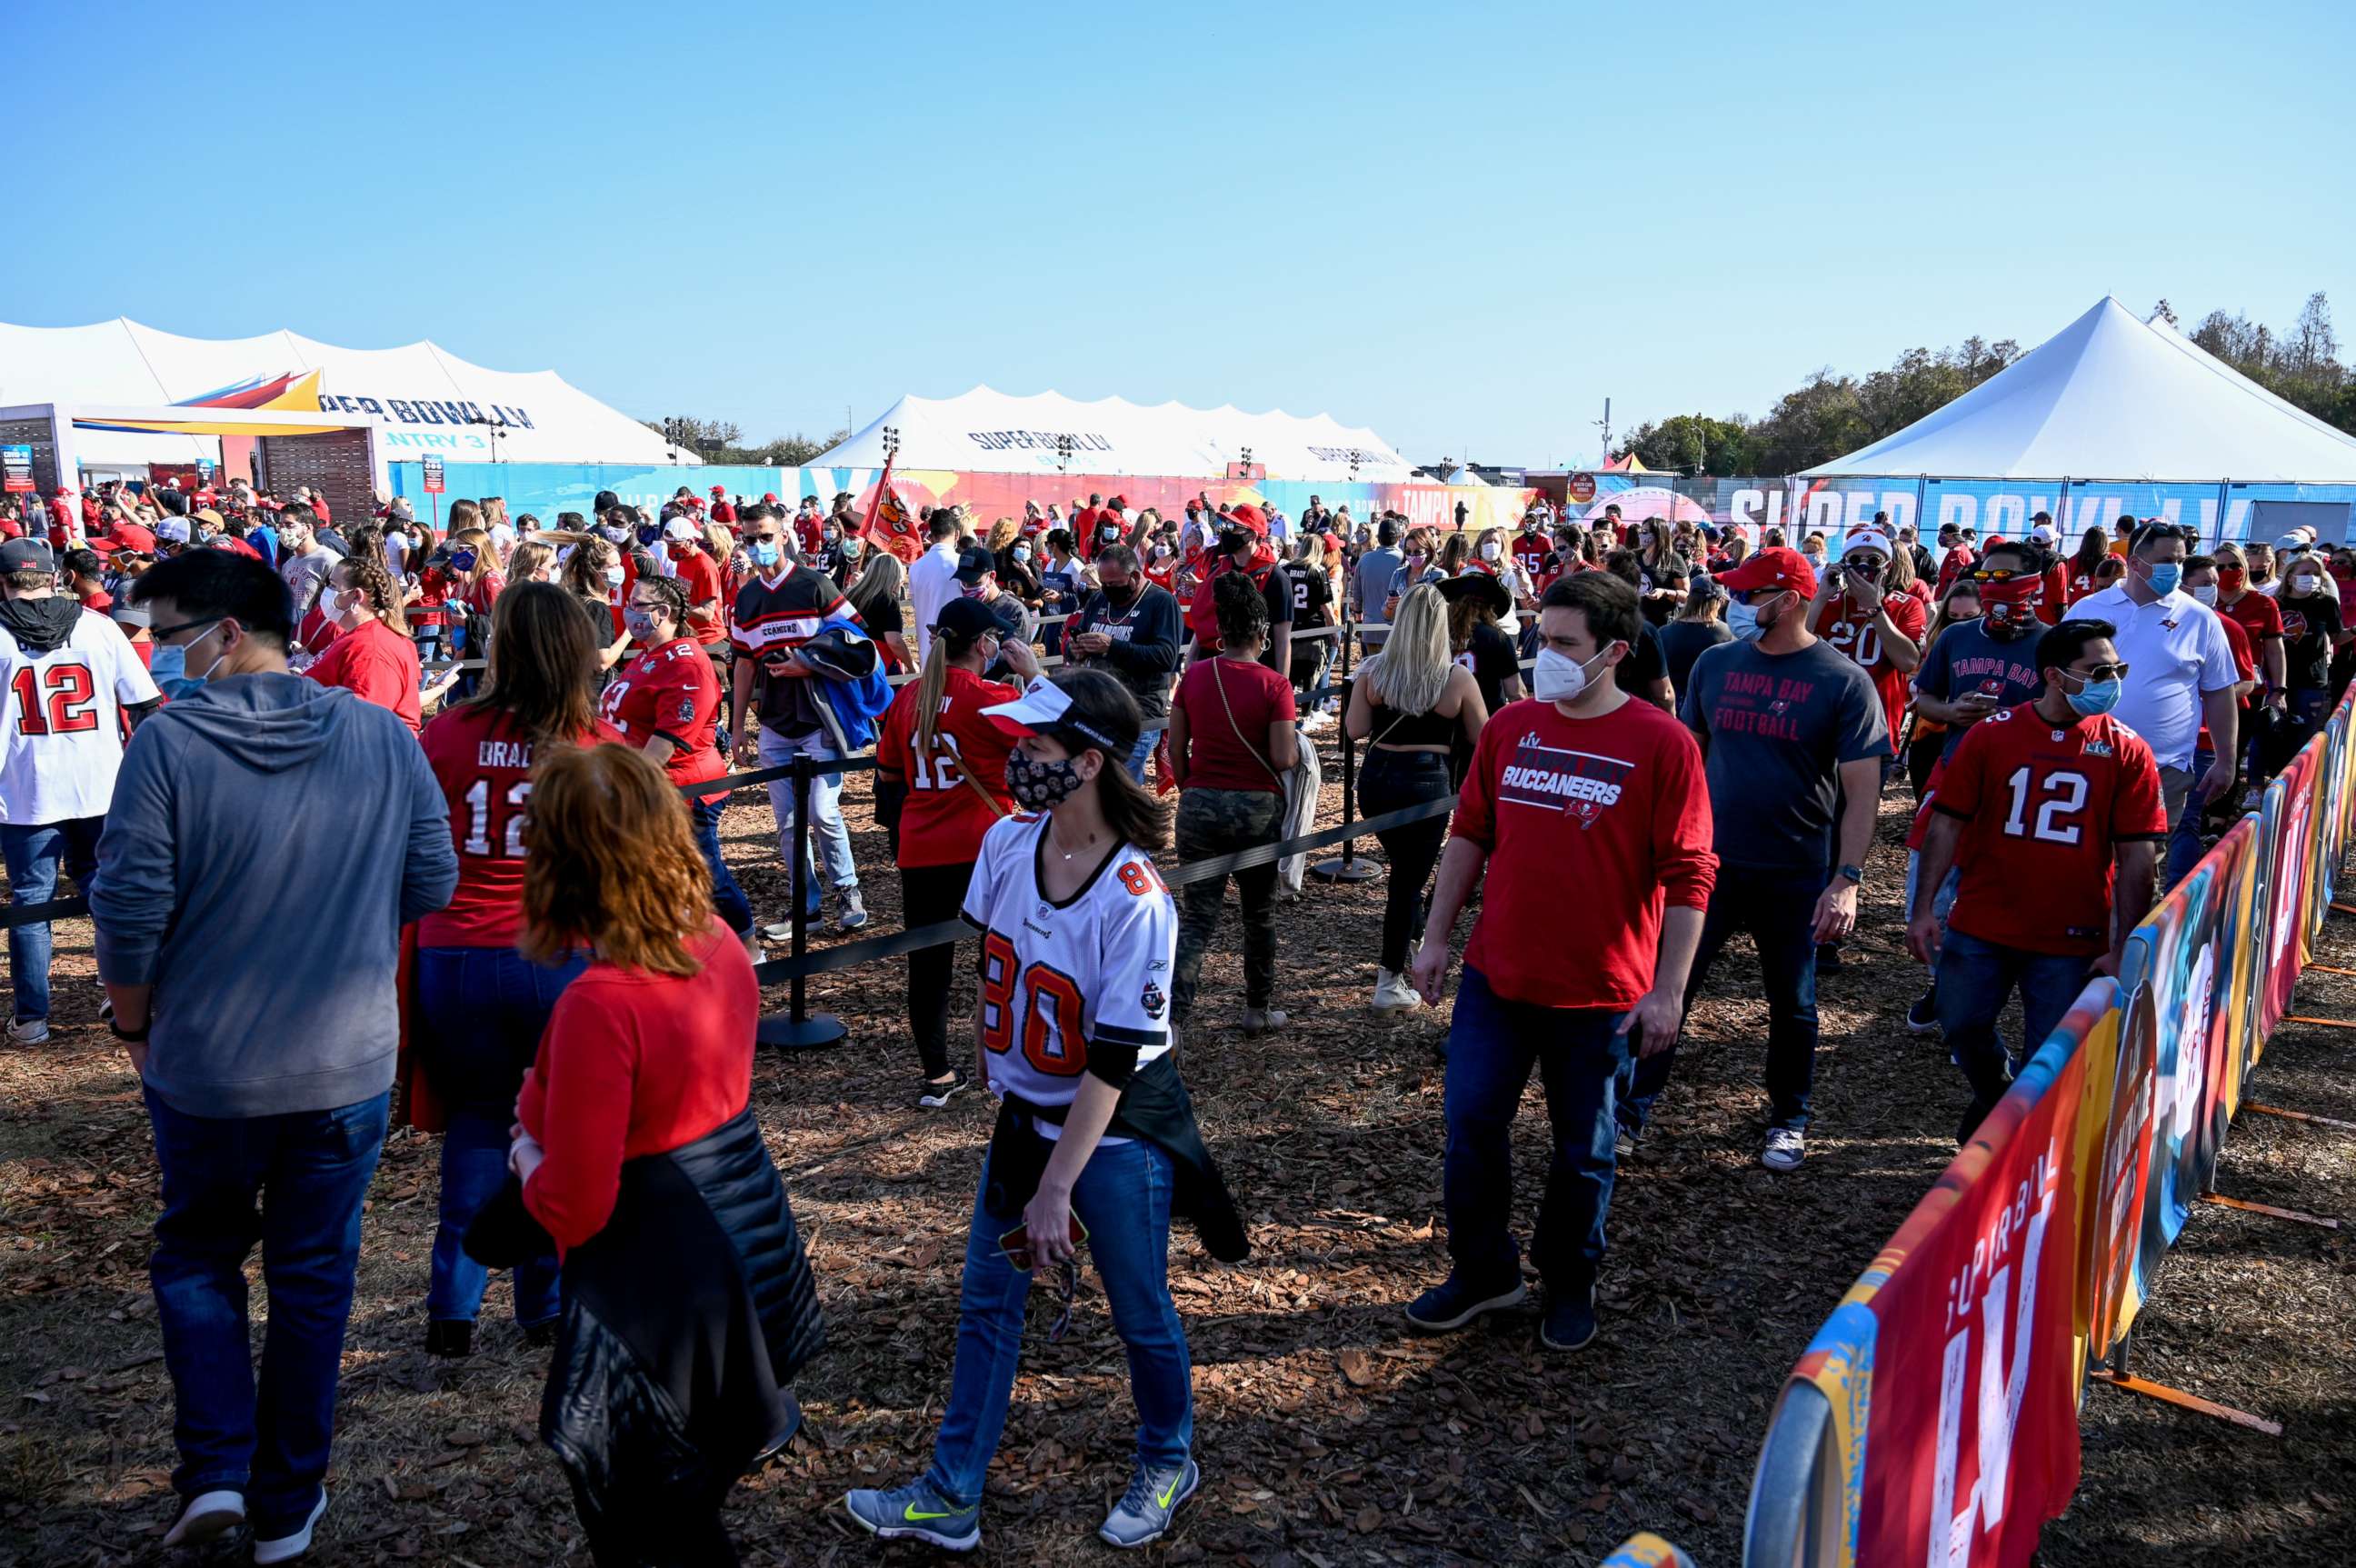 PHOTO: Health care workers enter the stadium prior to Super Bowl LV when the Tampa Bay Buccaneers will take on the defending champion Kansas City Chiefs at Raymond James Stadium, Feb. 7, 2021, in Tampa, Florida.